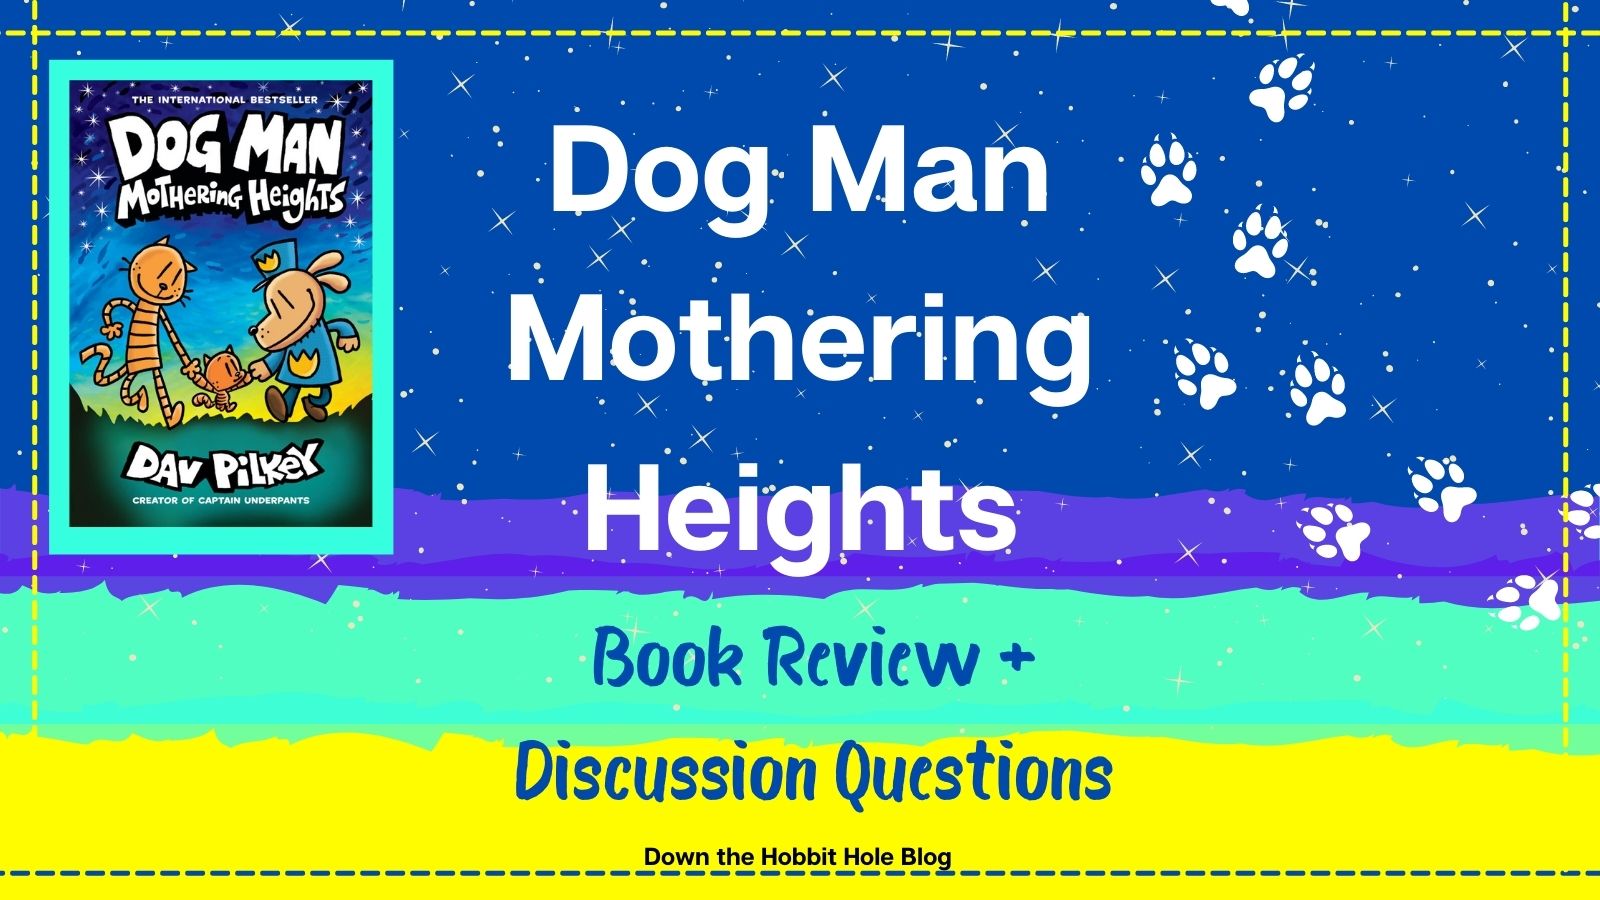 Best Shots review - Dog Man: Mothering Heights is another light